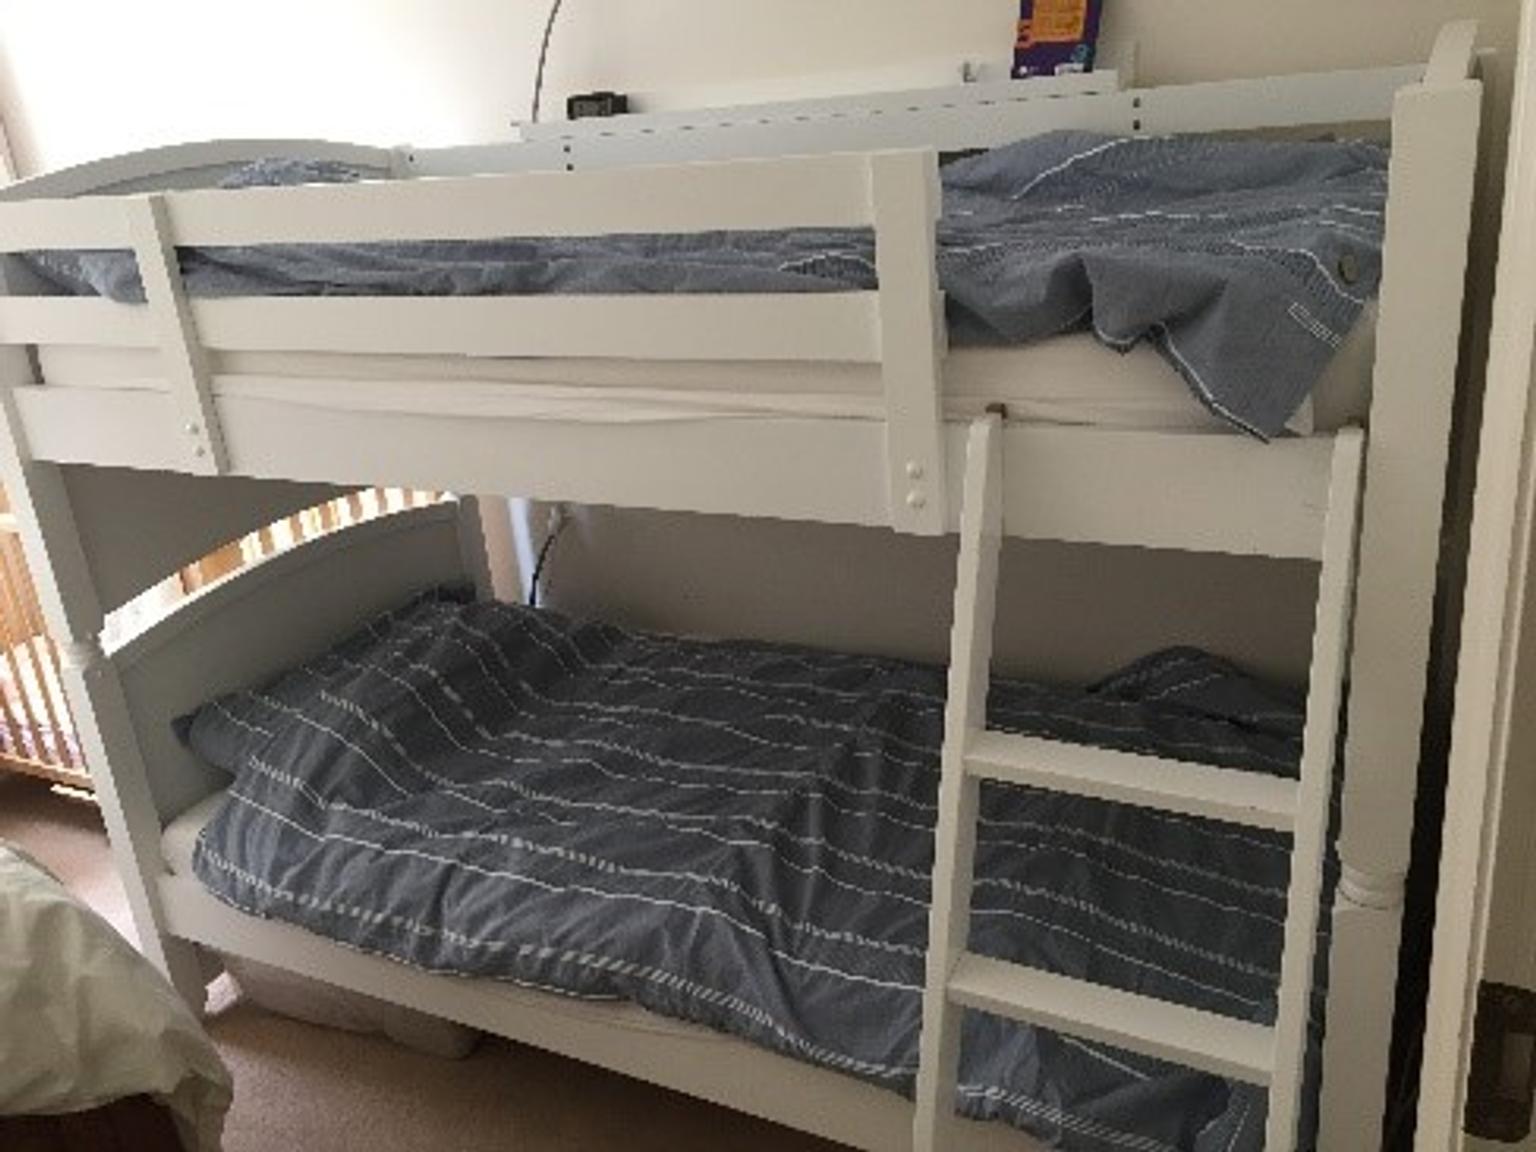 Colonial Bunk Beds From Costco In, Costco White Bunk Beds